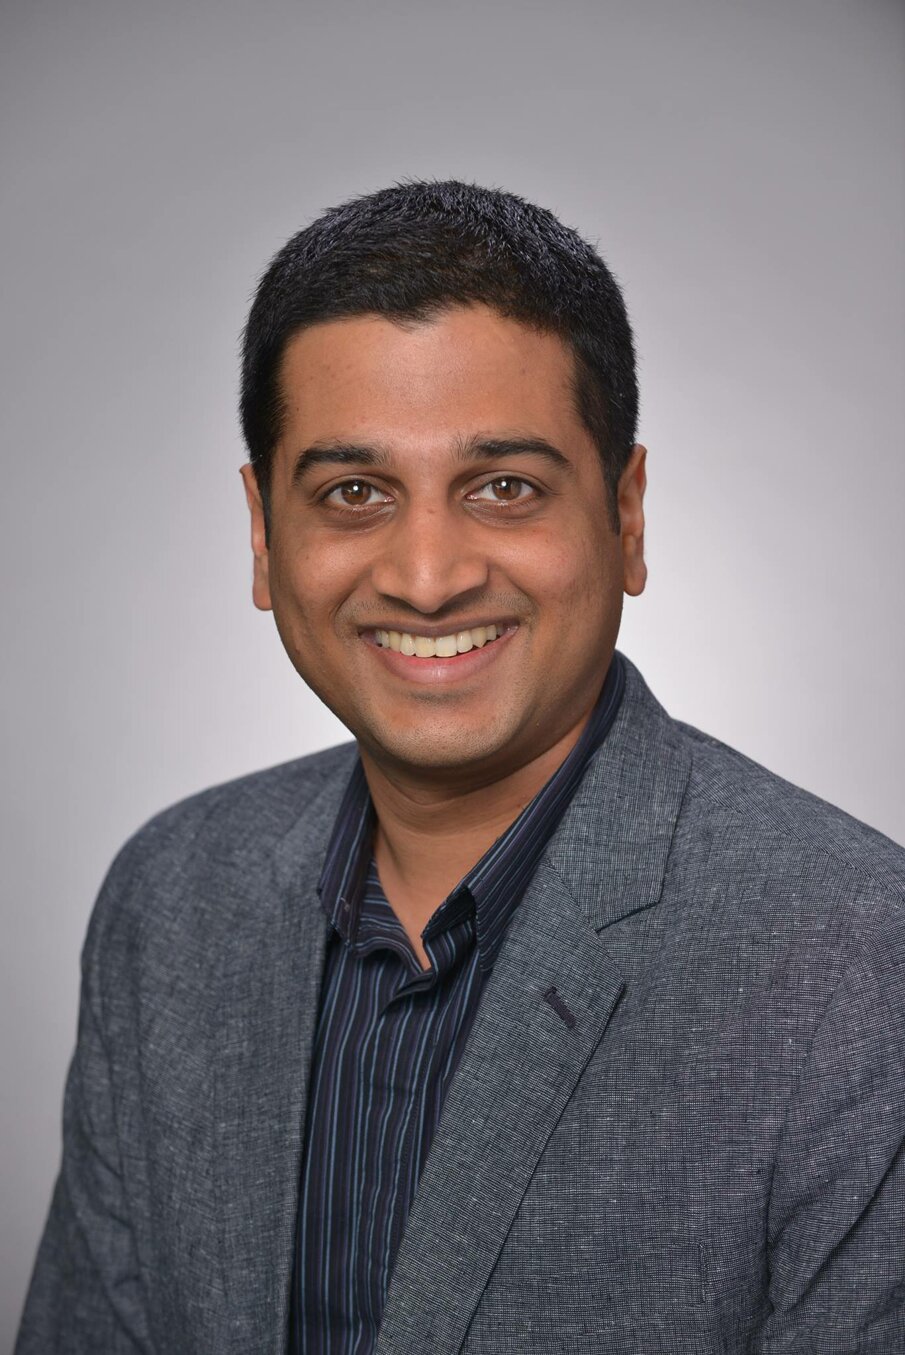 Dr Akshay Kumarswamy (BDS, CAGS, MS-Perio, USA ) is a Diplomate of the American Board of Periodontology and Diplomate of International Congress of Oral Implantologists (ICOI).